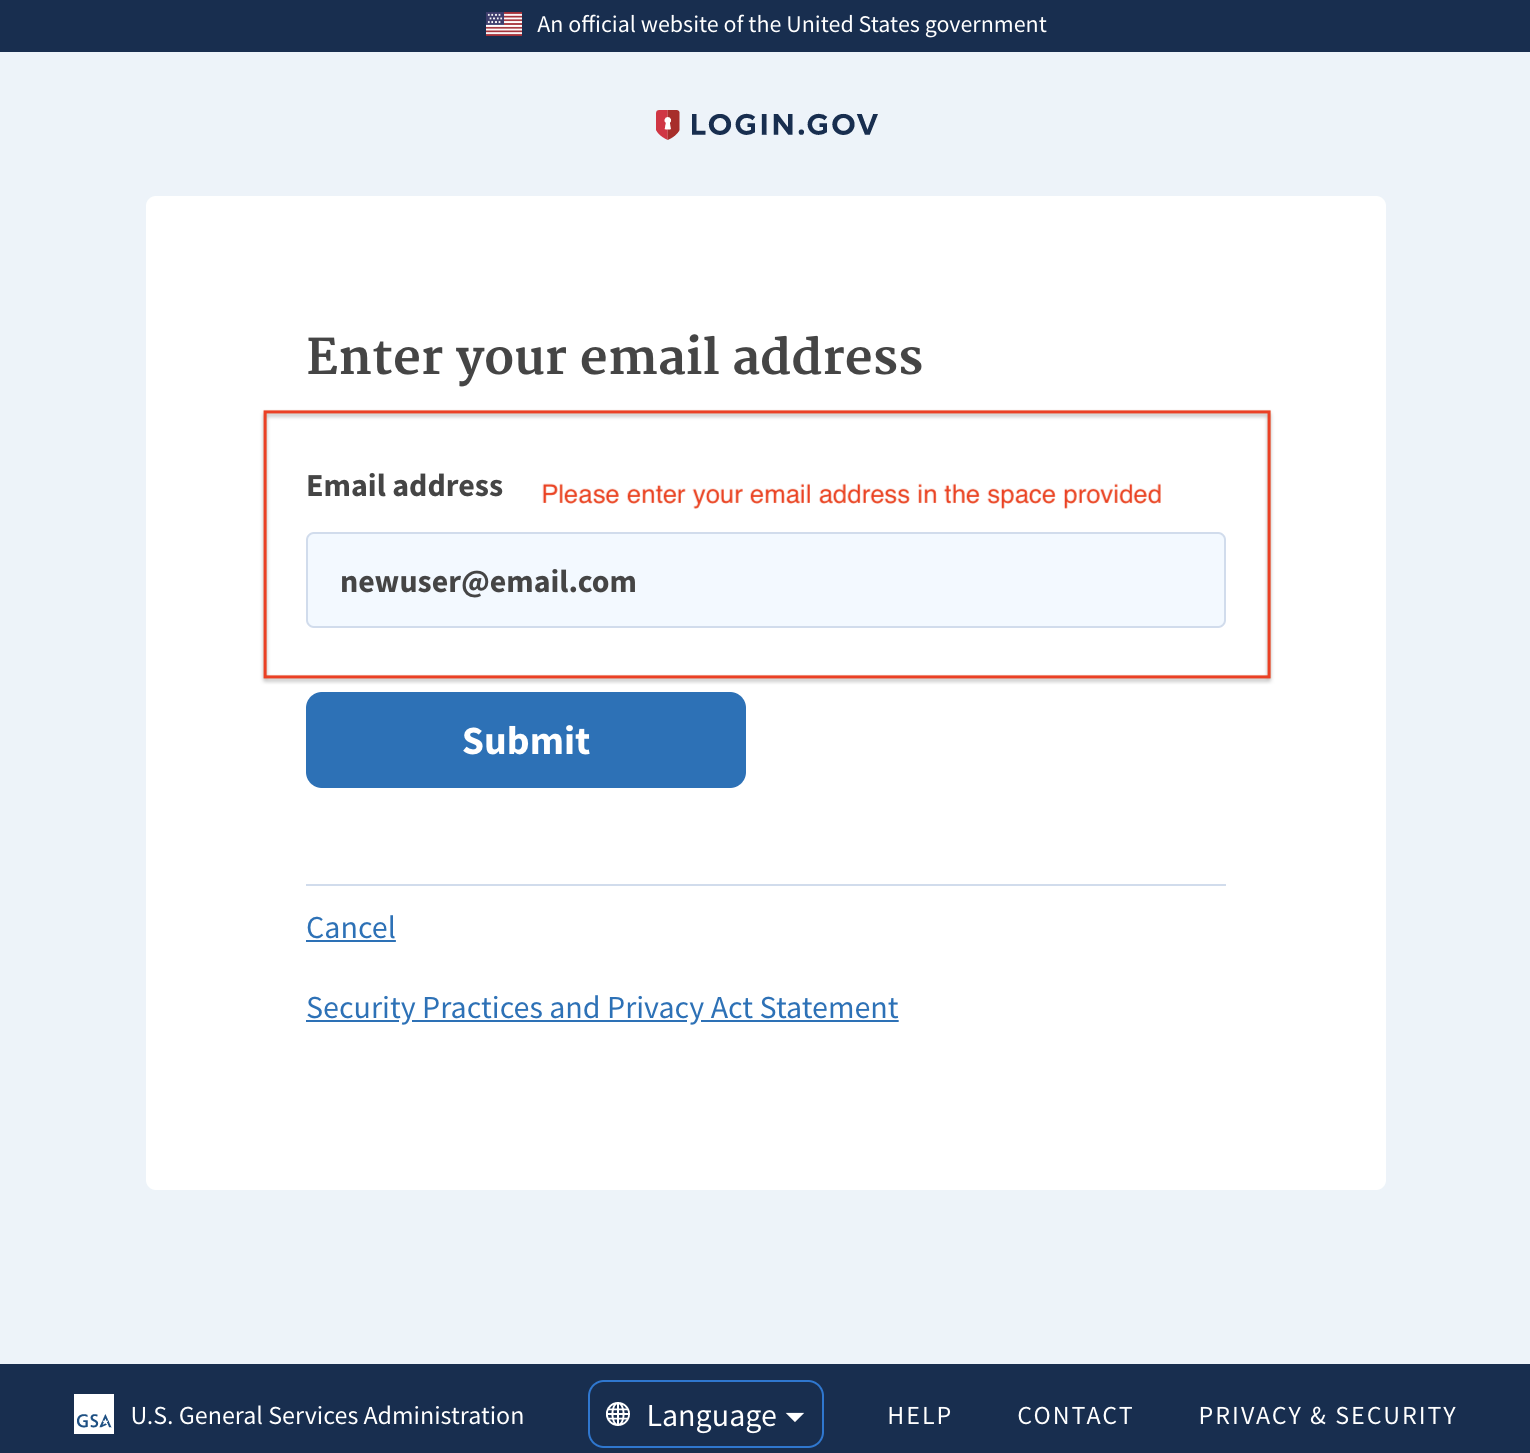 Enter your email help image